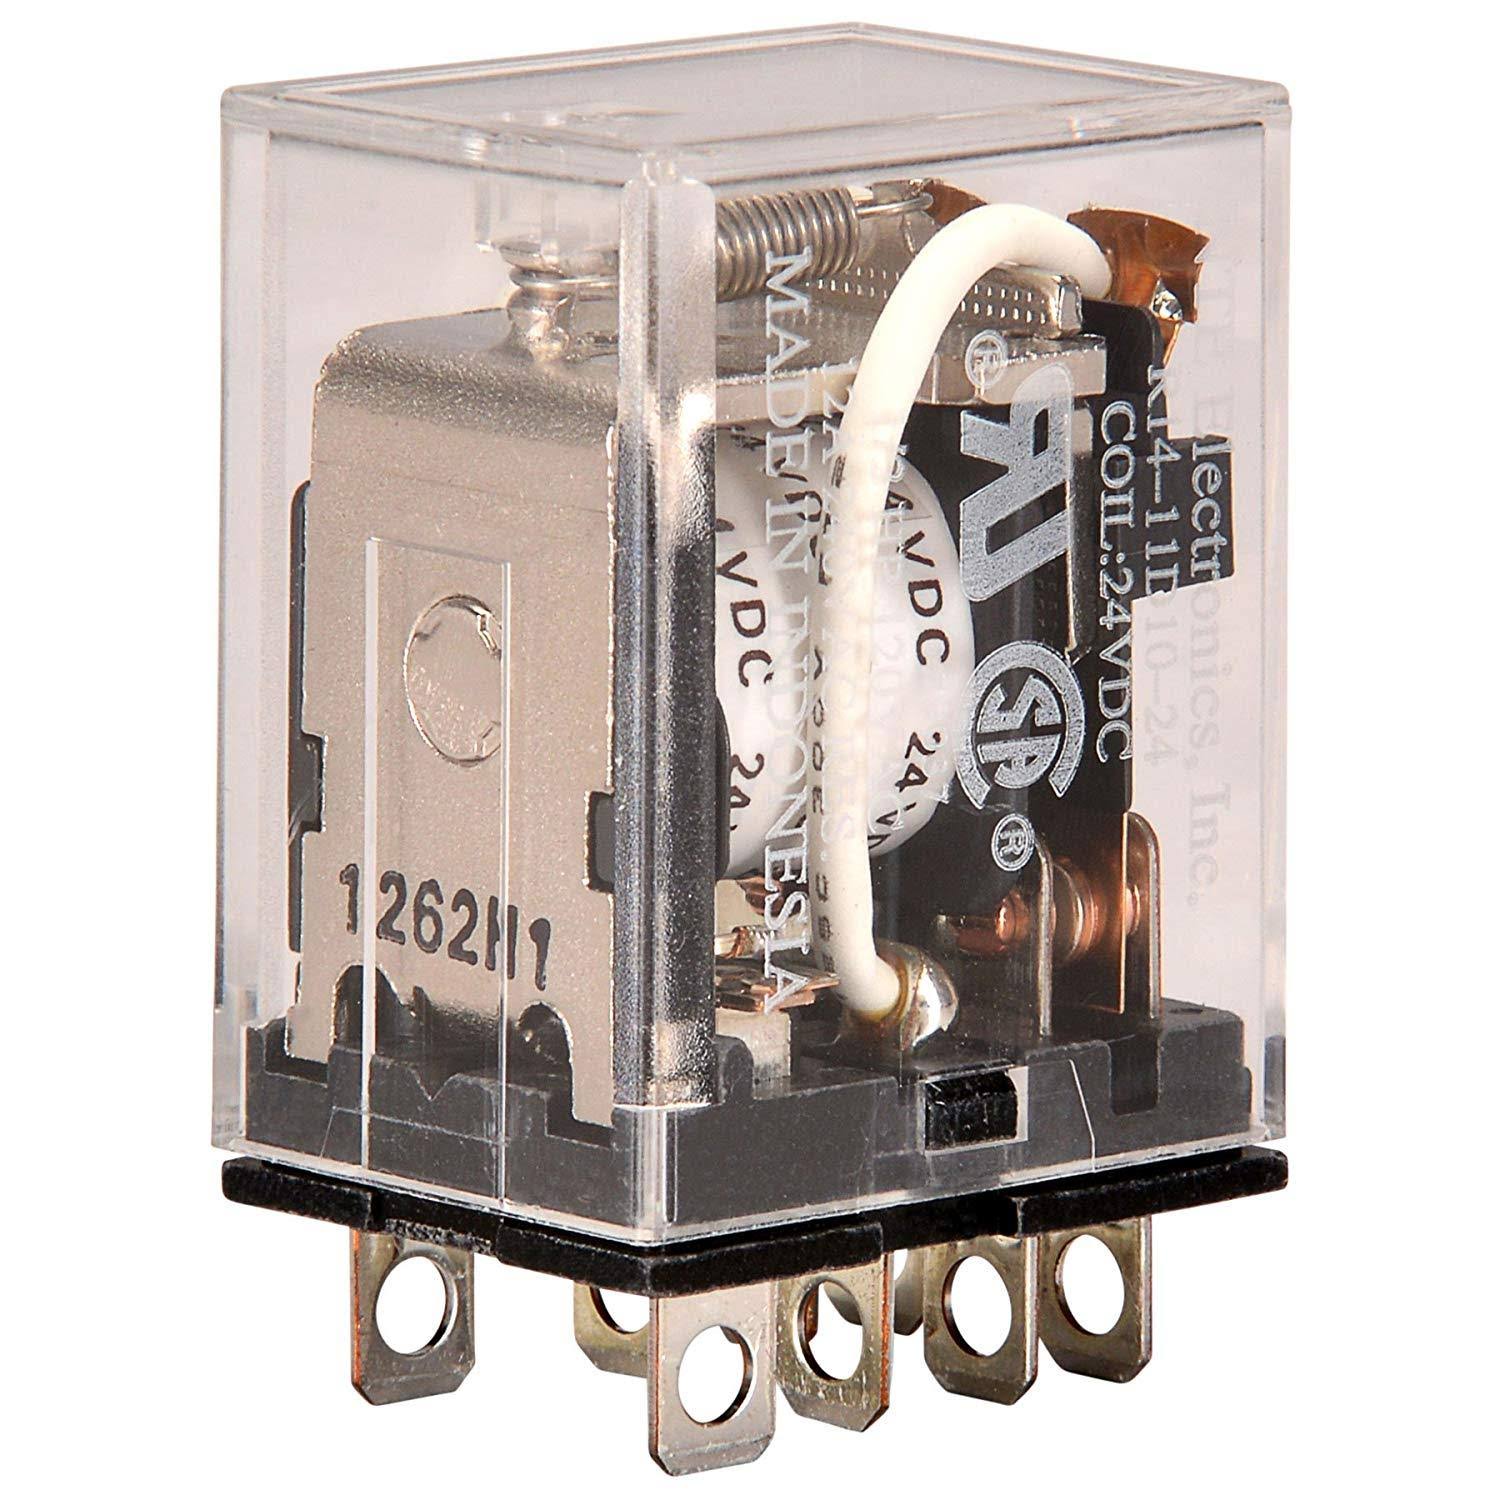 NTE Electronics Series R14 General Purpose DC Relay - DPDT Contact, 10A, 24V